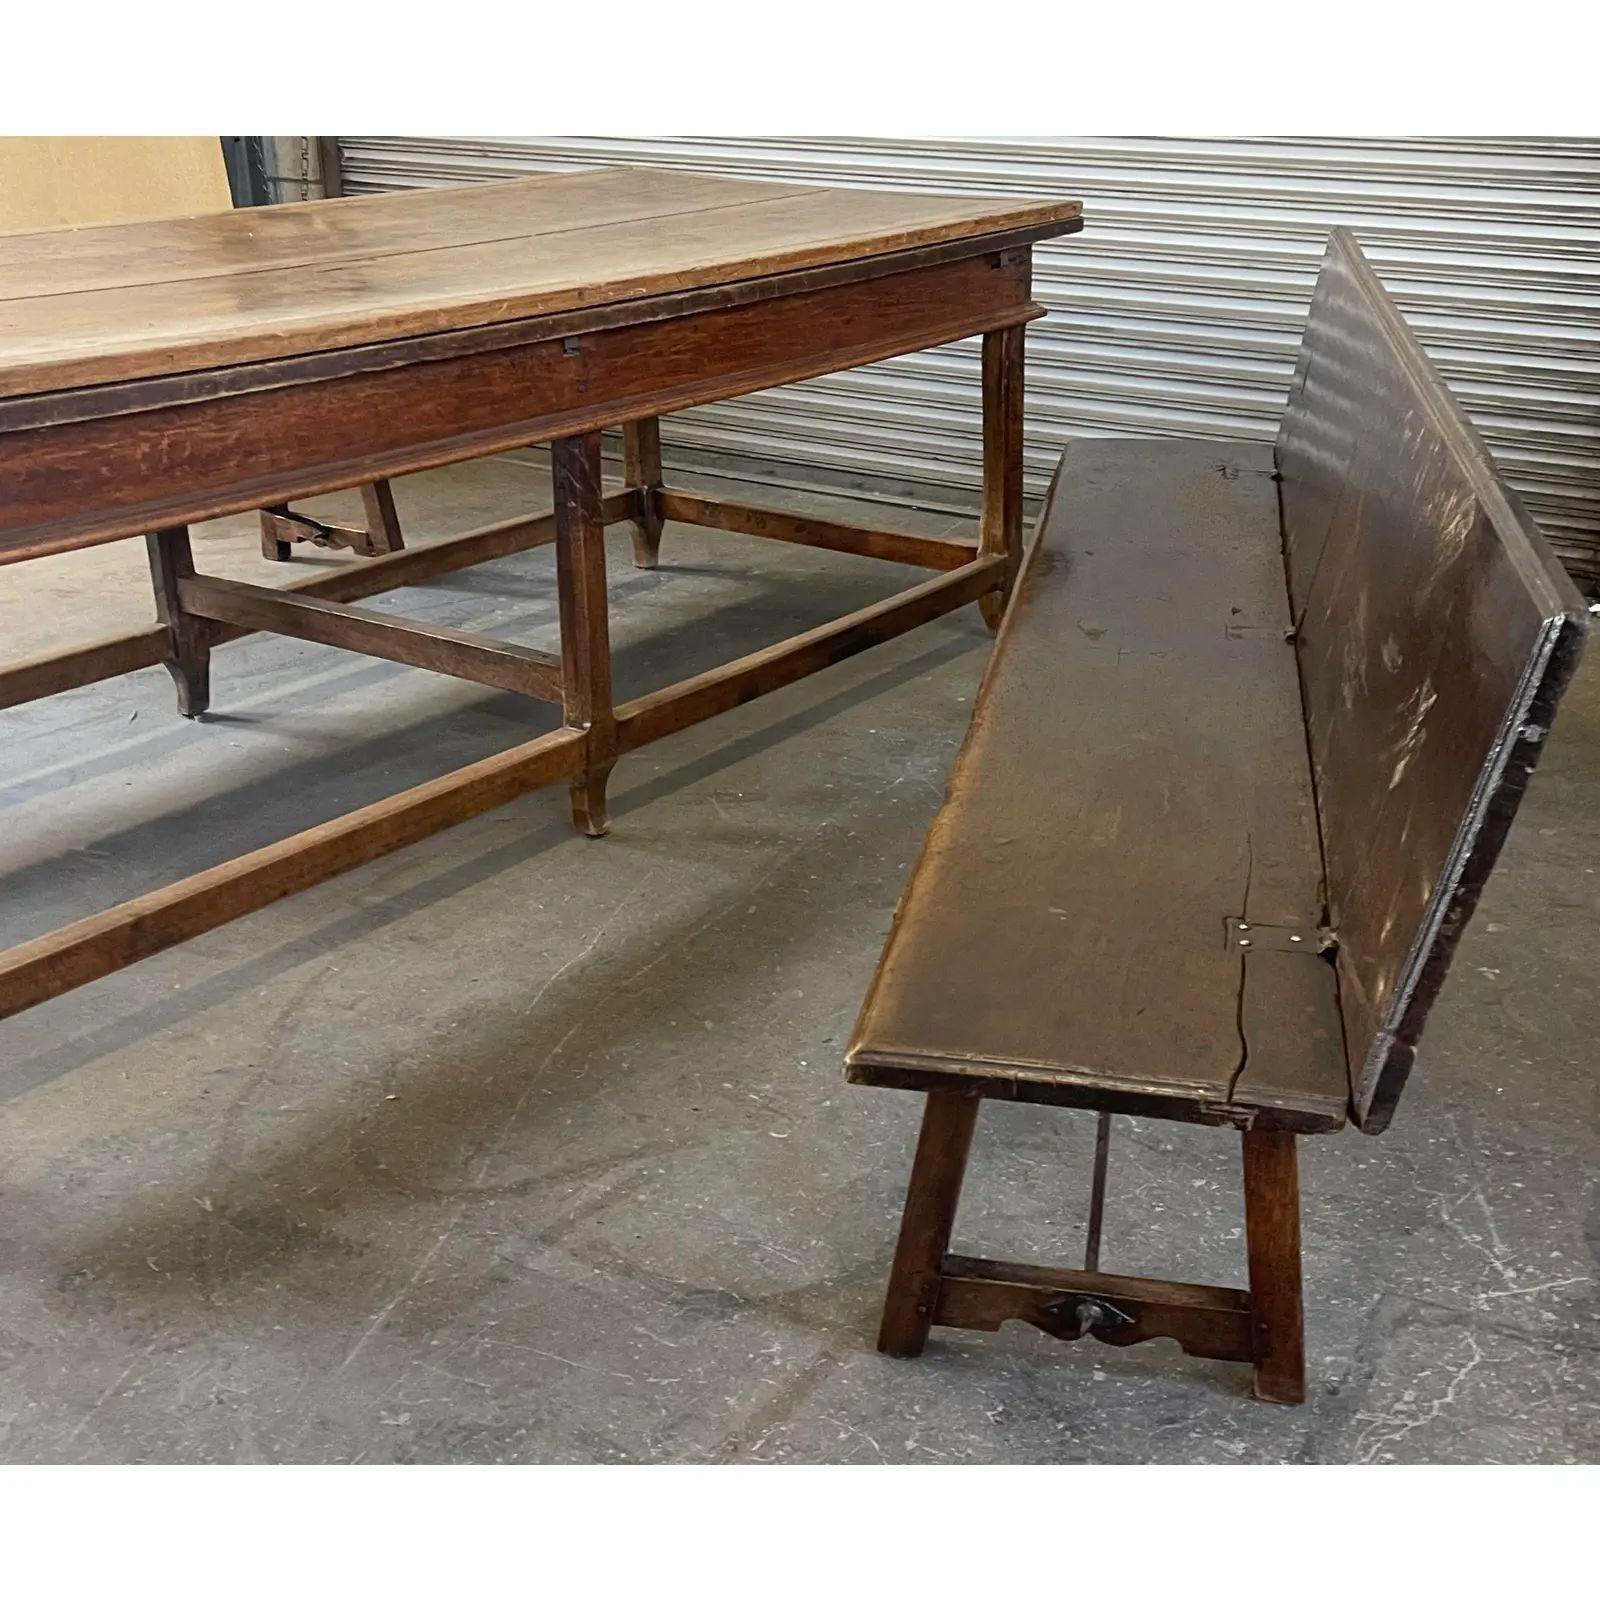 country table with bench